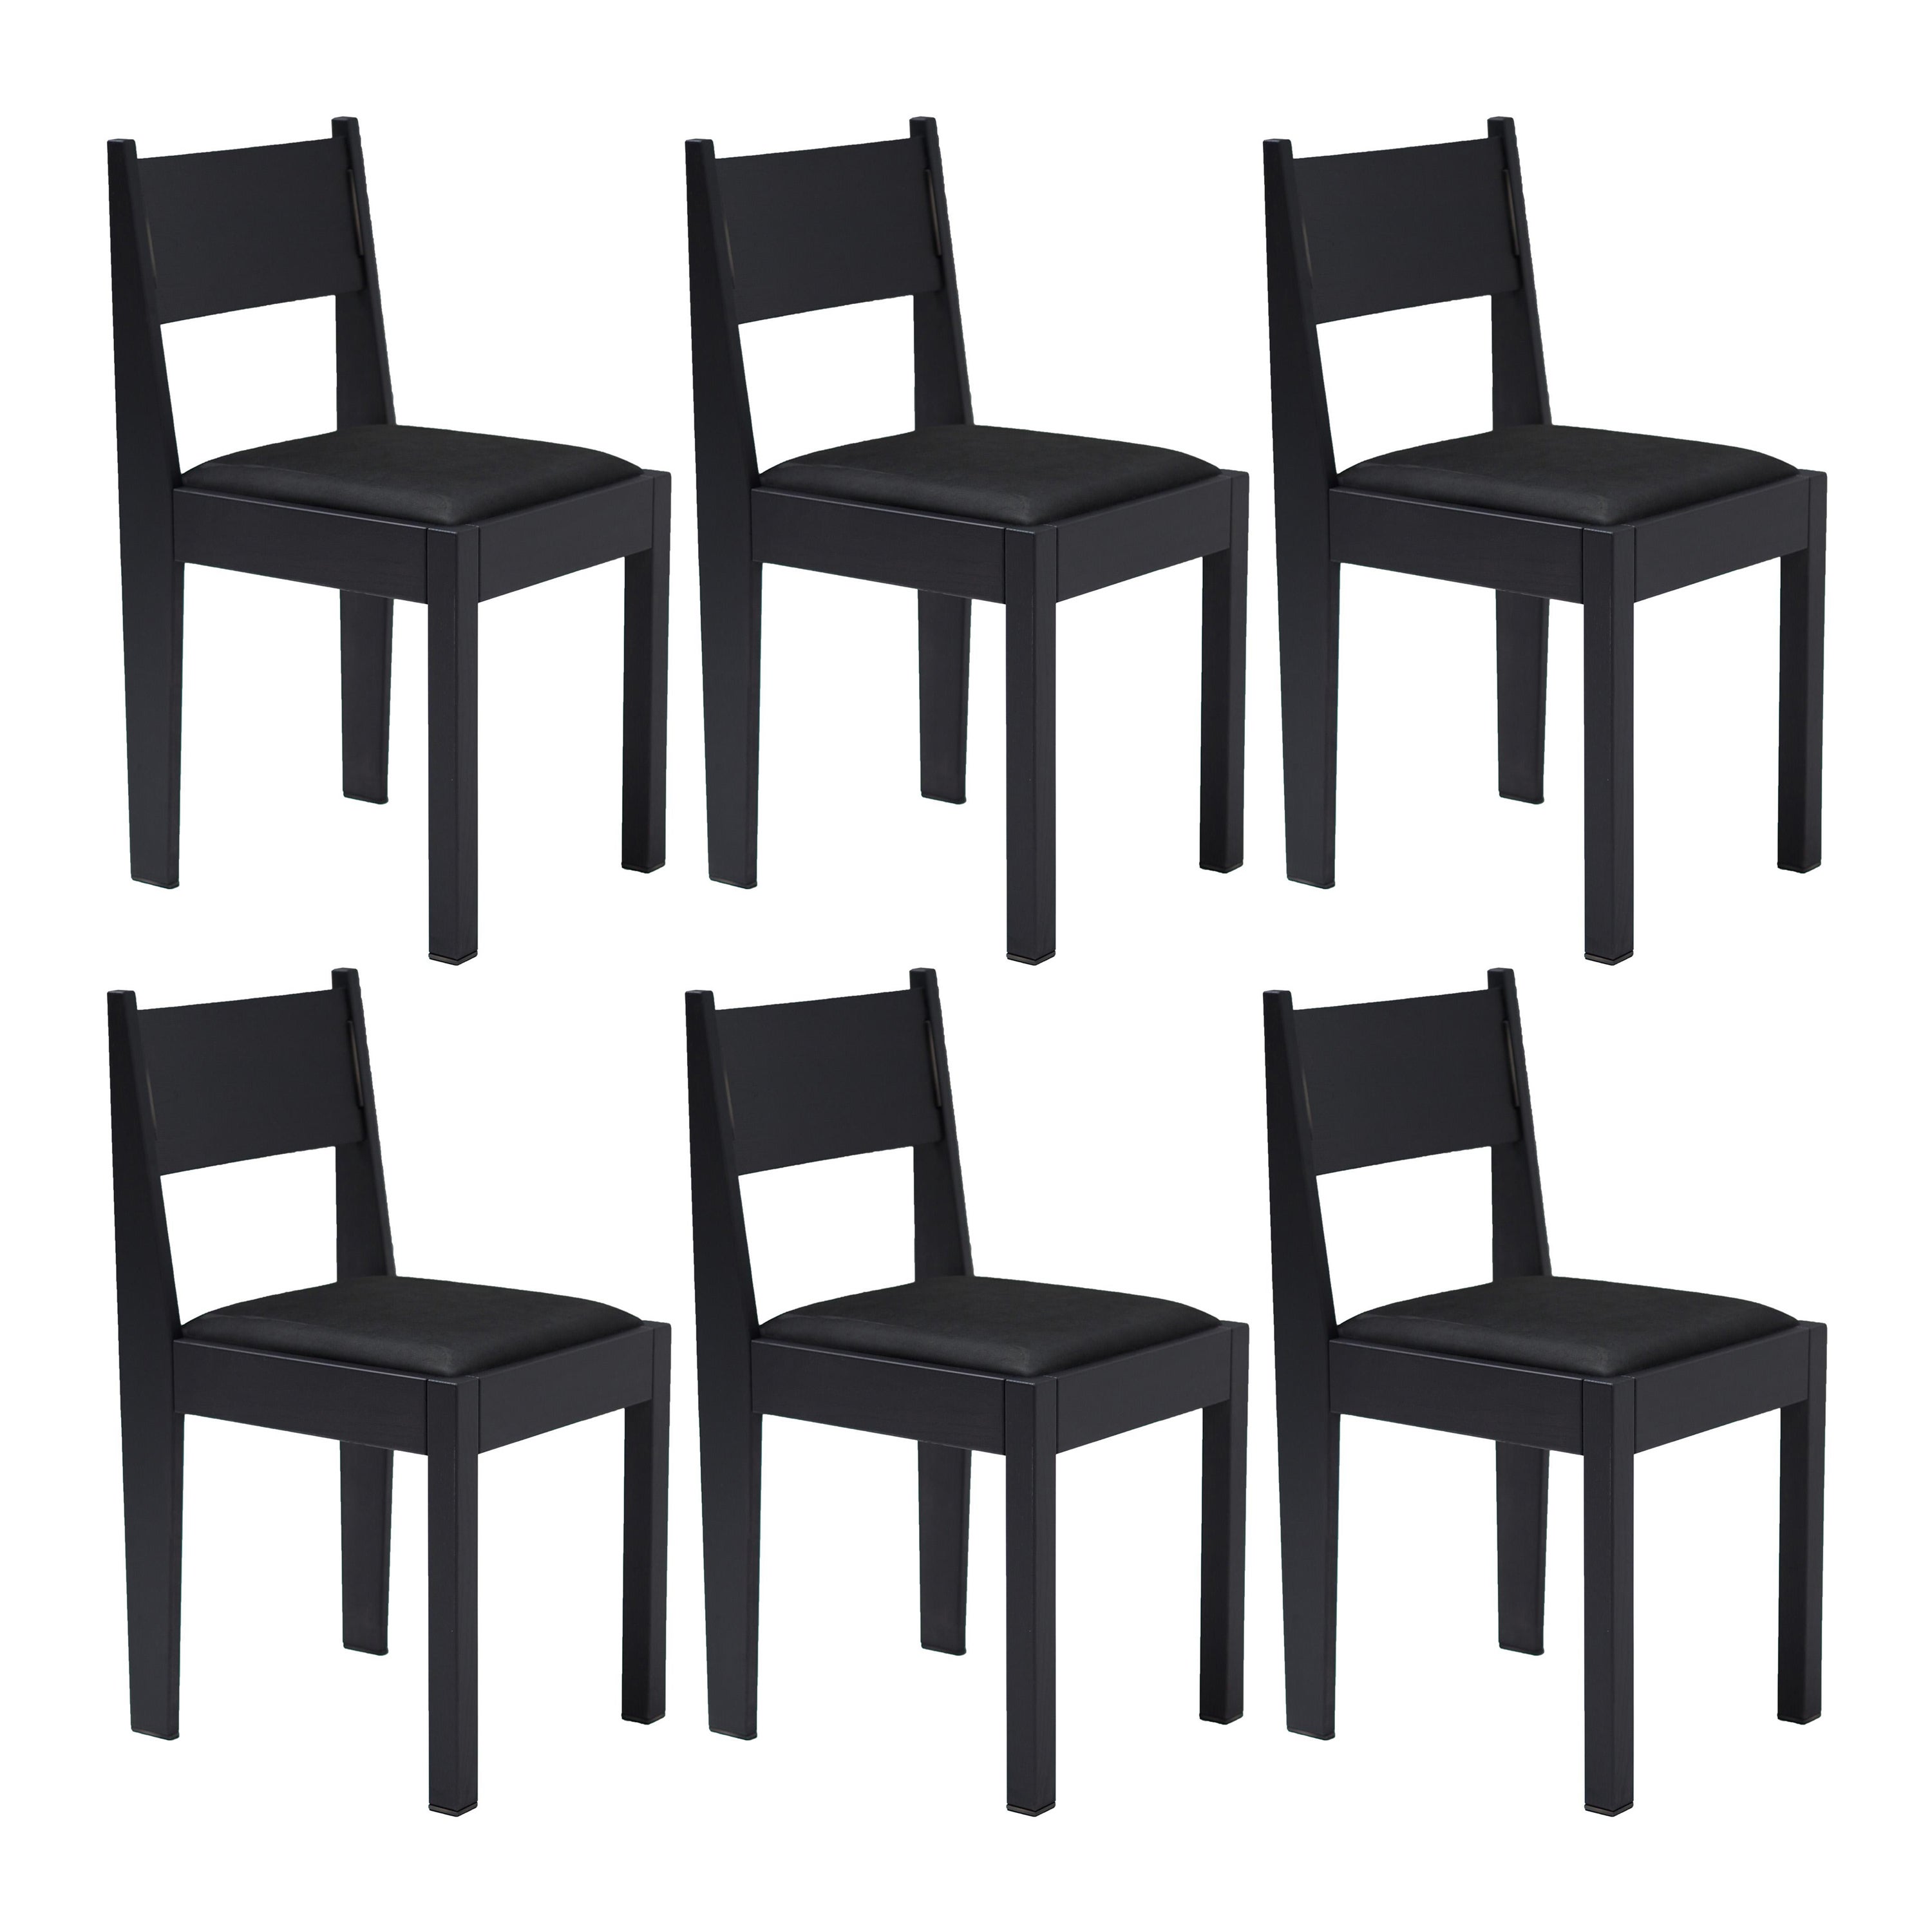 Set of 6 Art Deco Chairs, Black Ash Wood, Leather Upholstery & Bronze Details